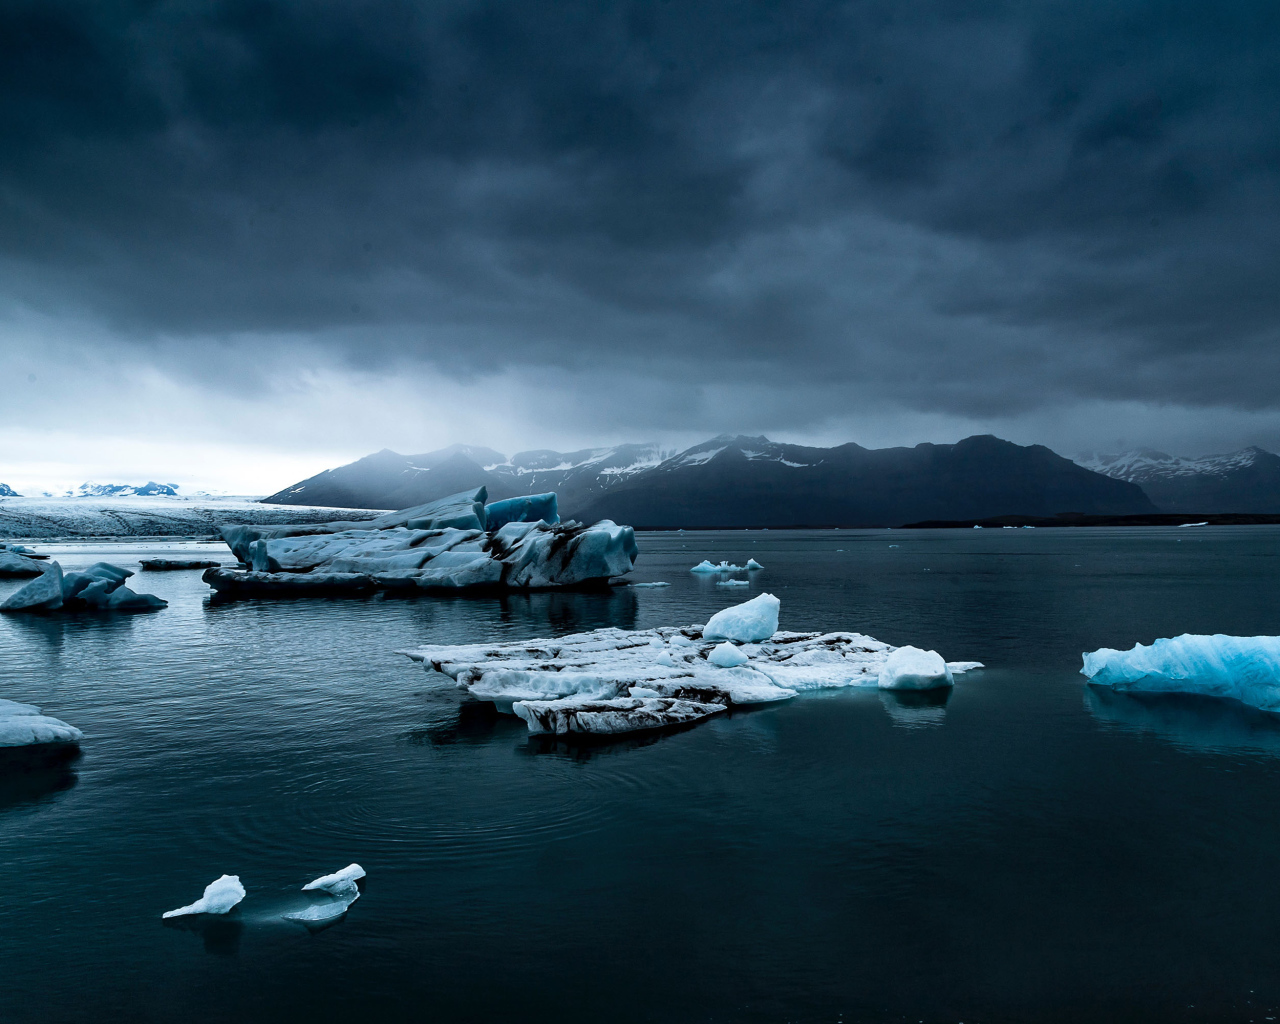 Large blue ice floes in the water under a cloudy sky